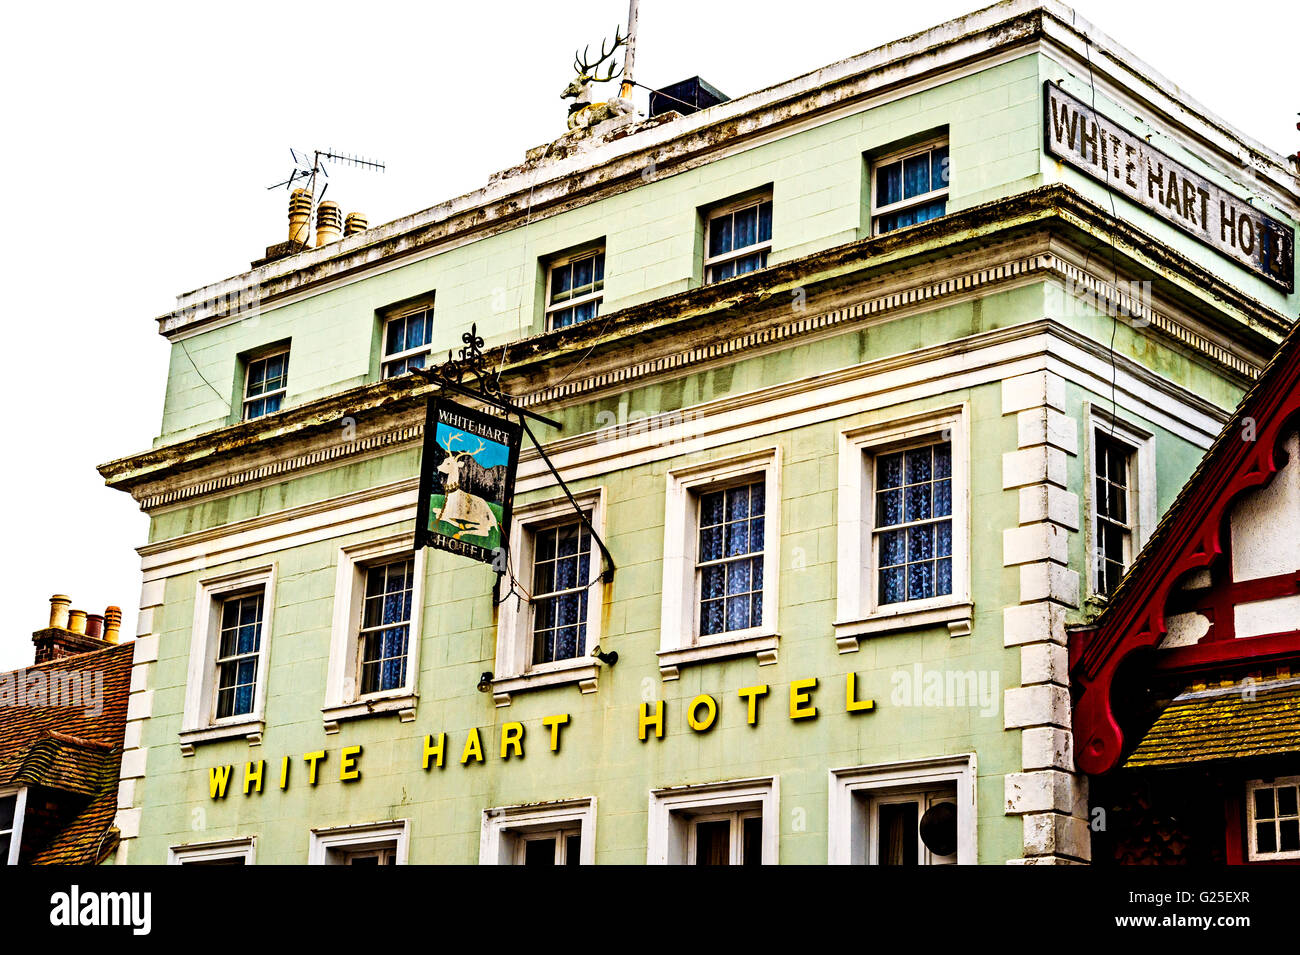 Lewes White Hart Hotel, cradle of the American revolution Stock Photo